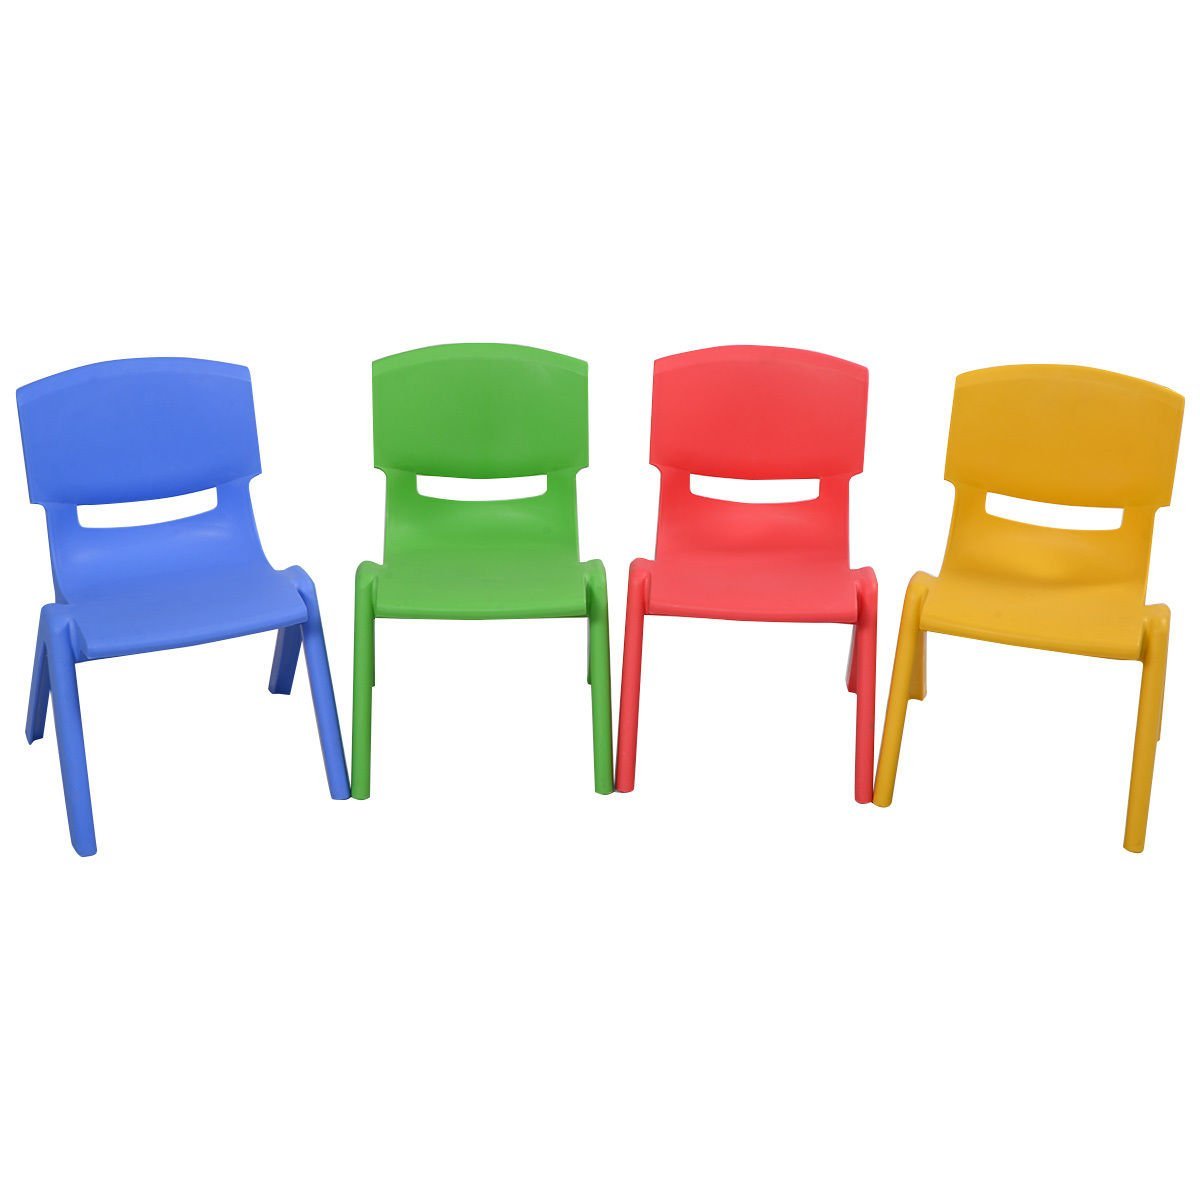 chairs for kids amazon.com: costzon set of 4 kids plastic chairs stackable play and learn YVZXHZS